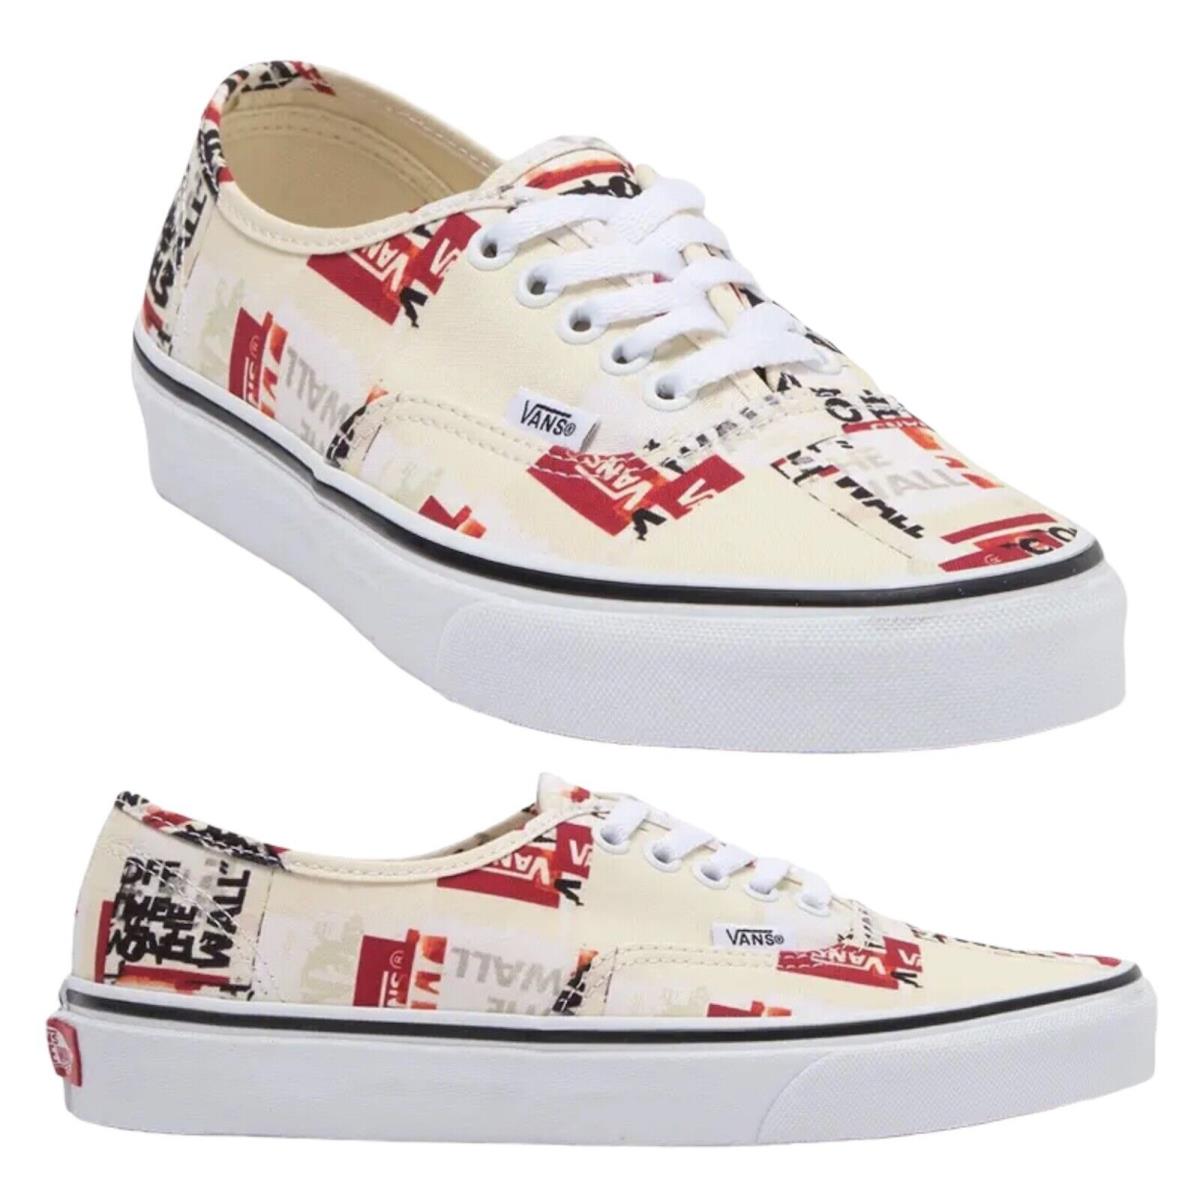 Vans Womens Size 7.5 Sneakers Shoes Packing Tape Shoe Lace Up Low Top